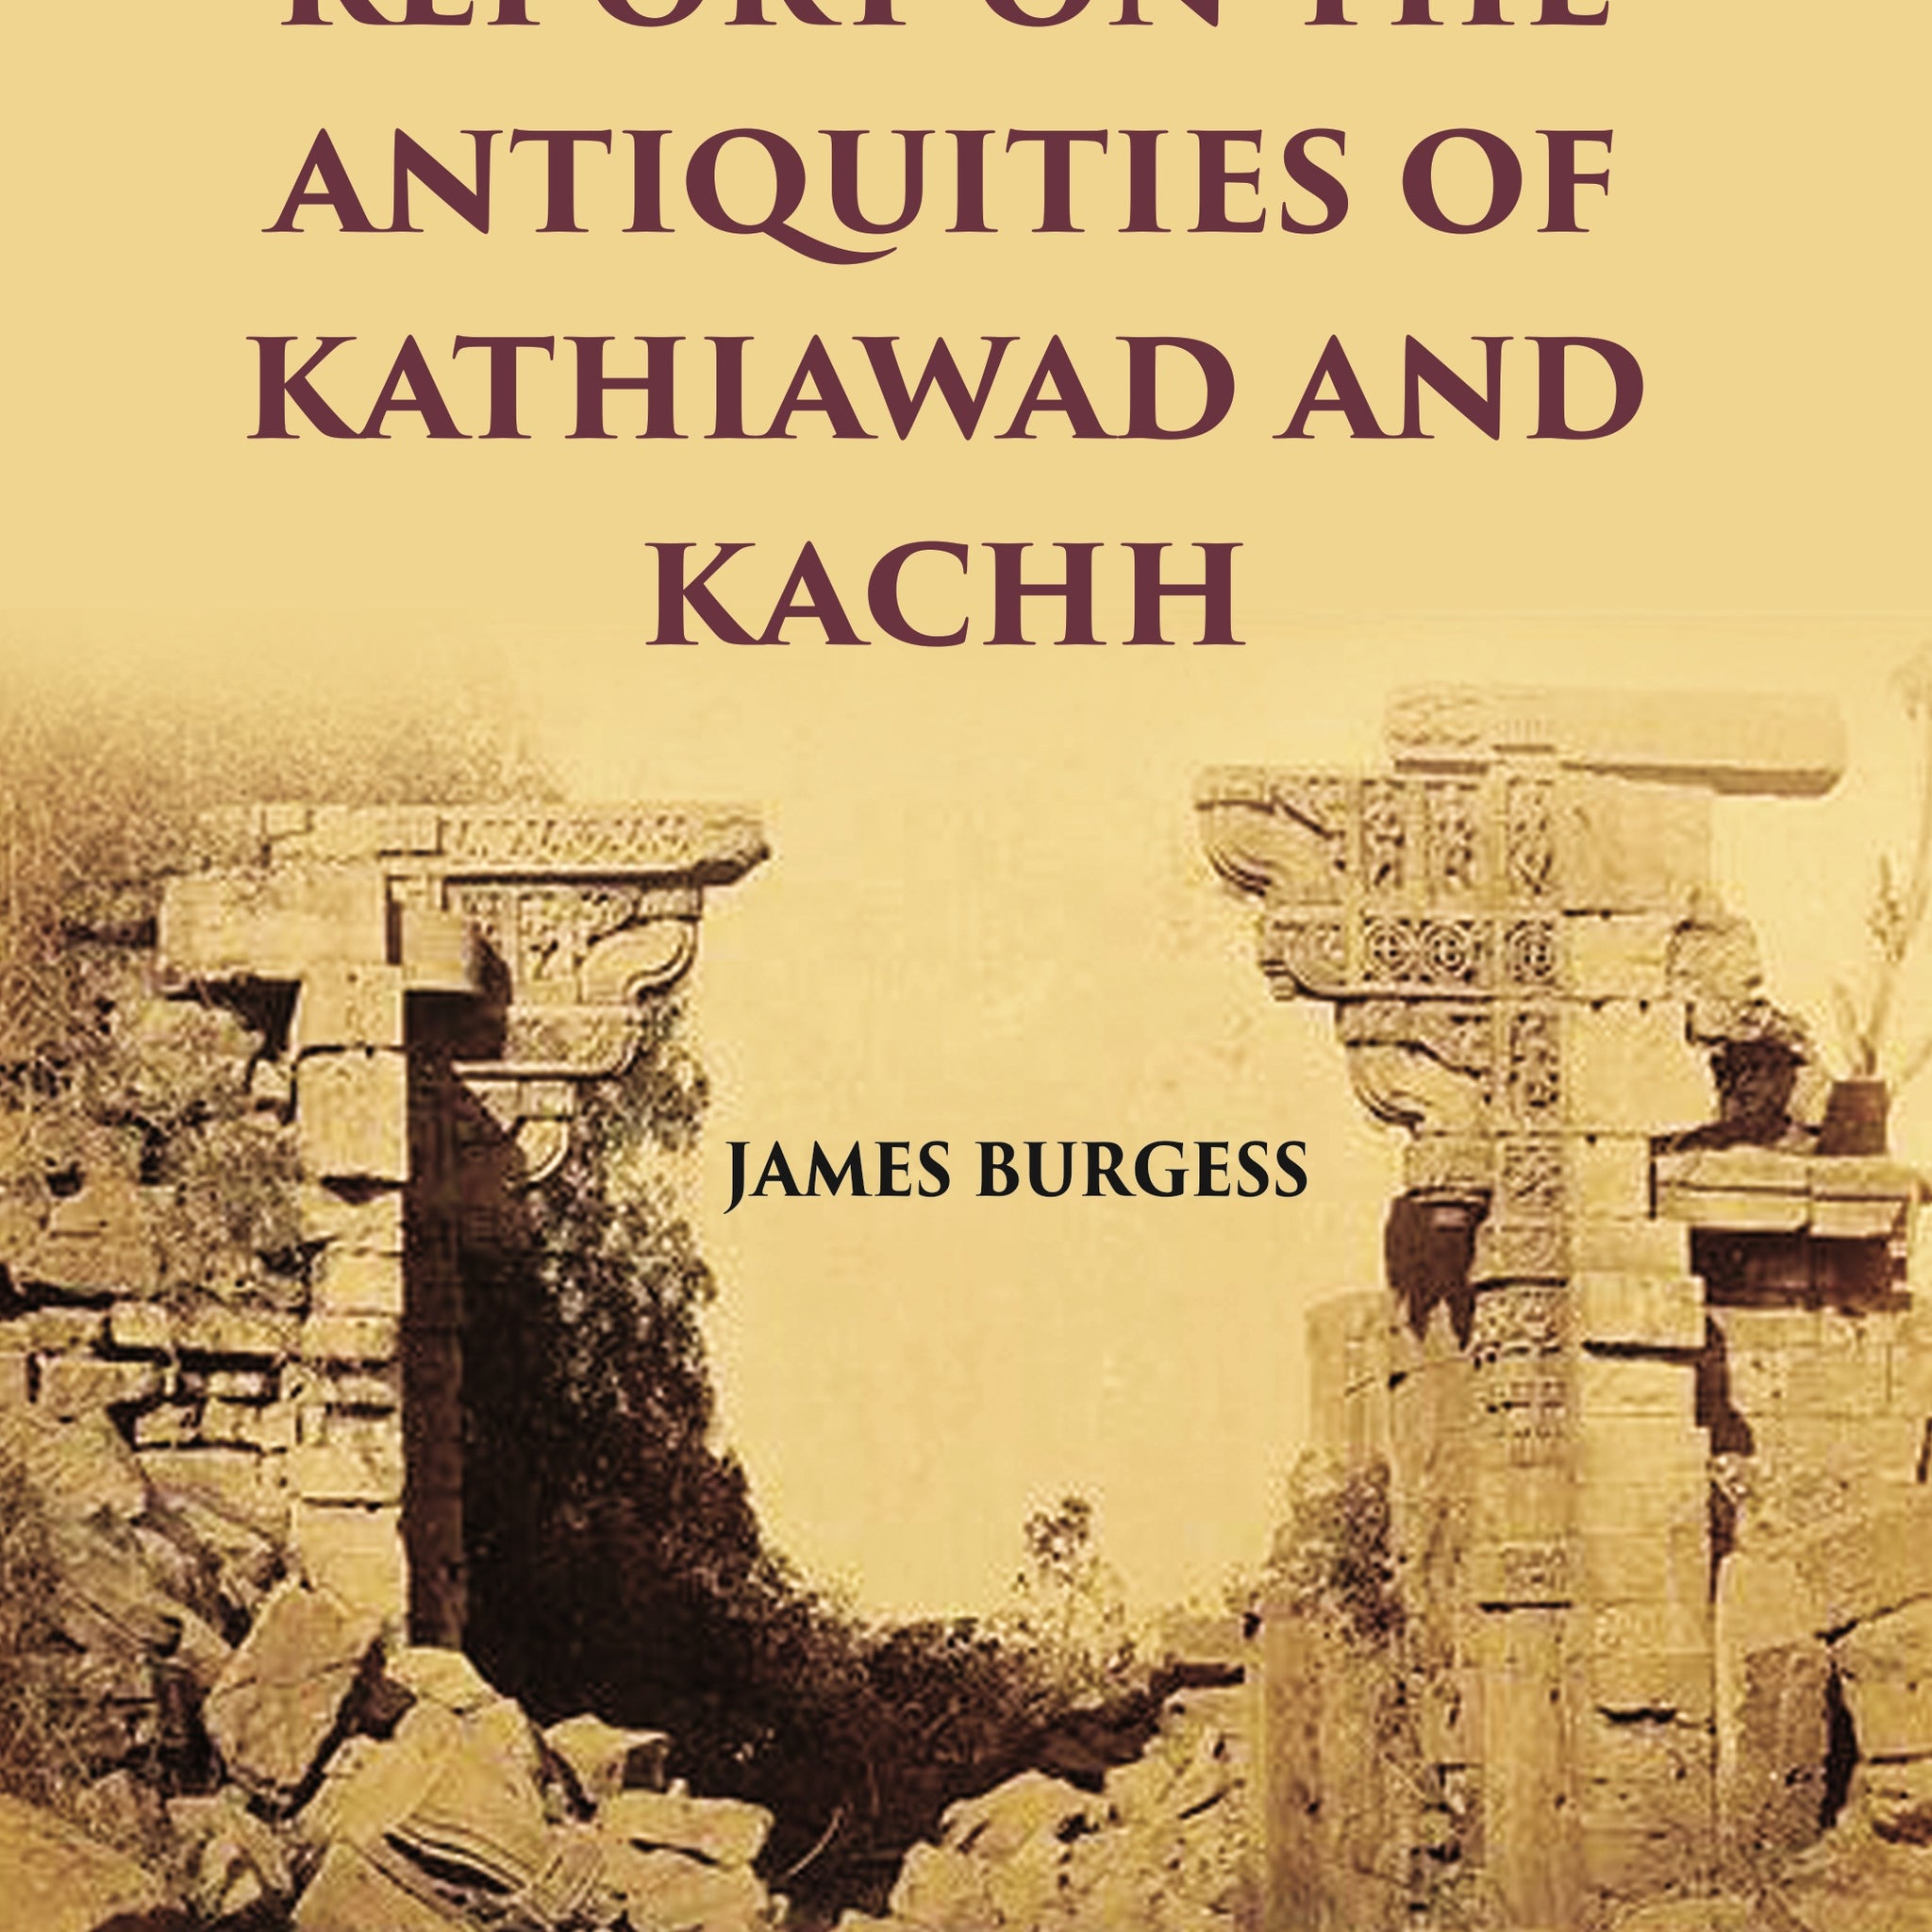 REPORT ON THE ANTIQUITIES OF KATHIAWAD AND KACHH